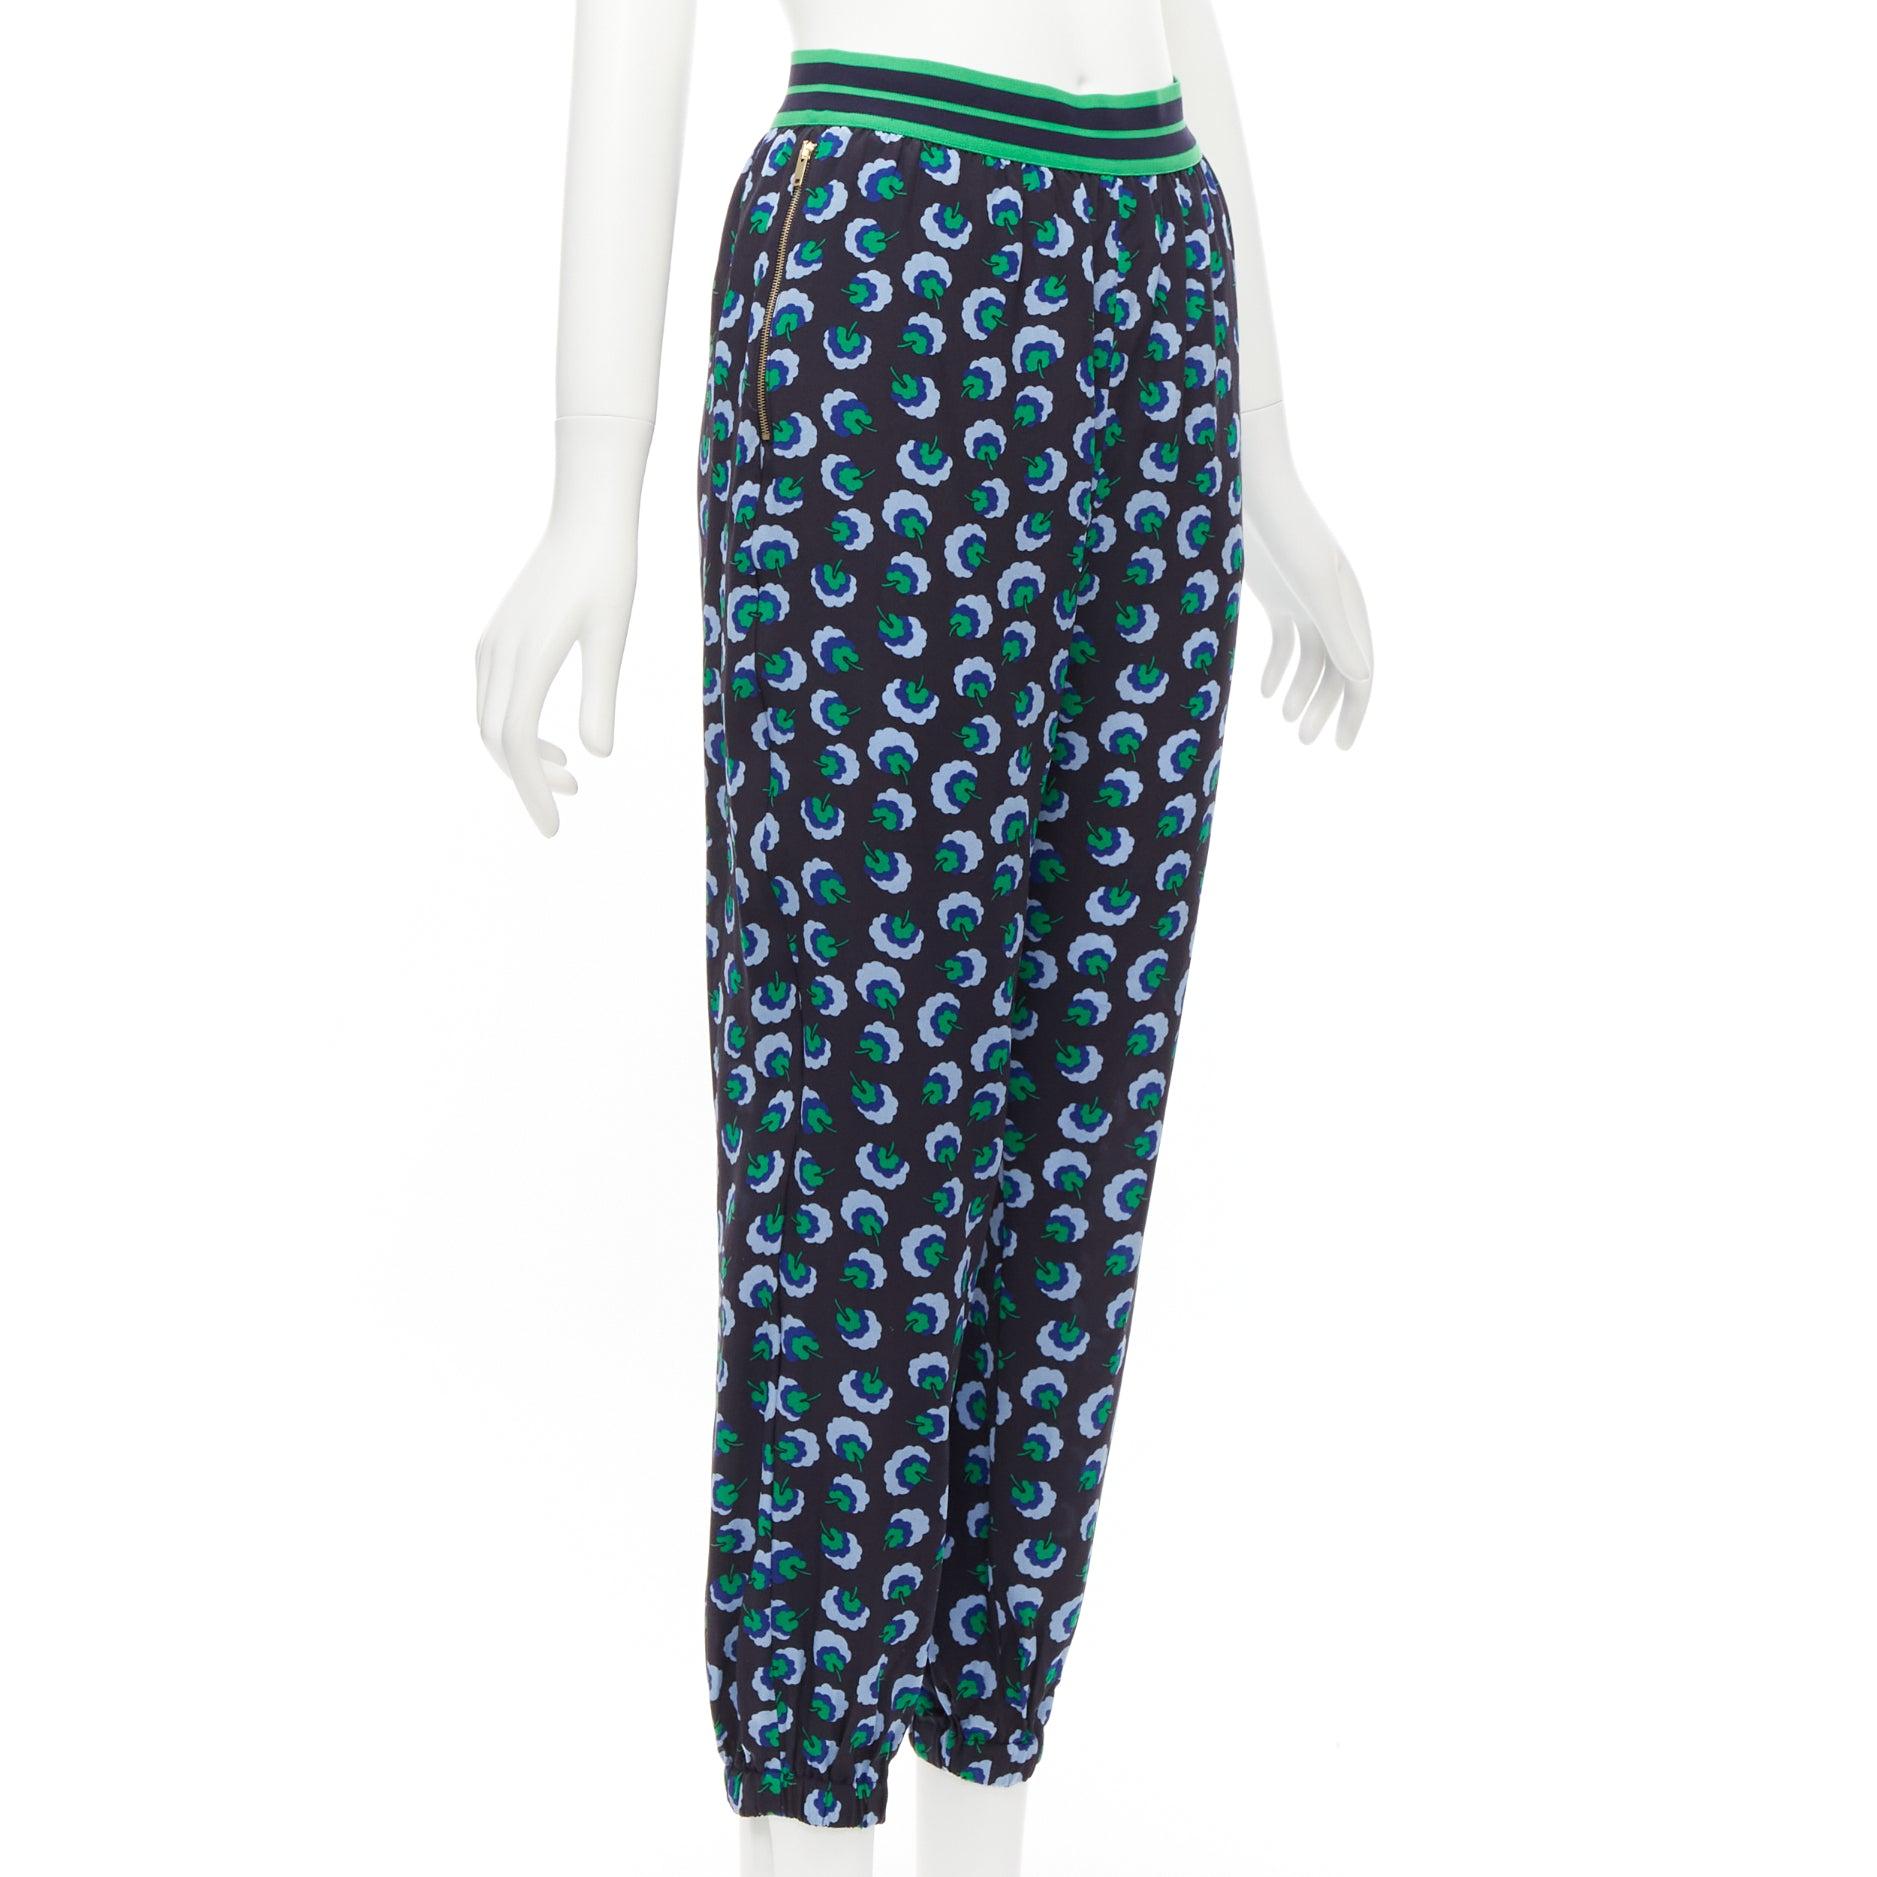 STELLA MCCARTNEY 2014 blue green 100% silk graphic floral web band pants IT36 XXS
Reference: CELG/A00261
Brand: Stella McCartney
Designer: Stella McCartney
Collection: 2014
Material: Silk
Color: Green, Blue
Pattern: Floral
Closure: Elasticated
Extra